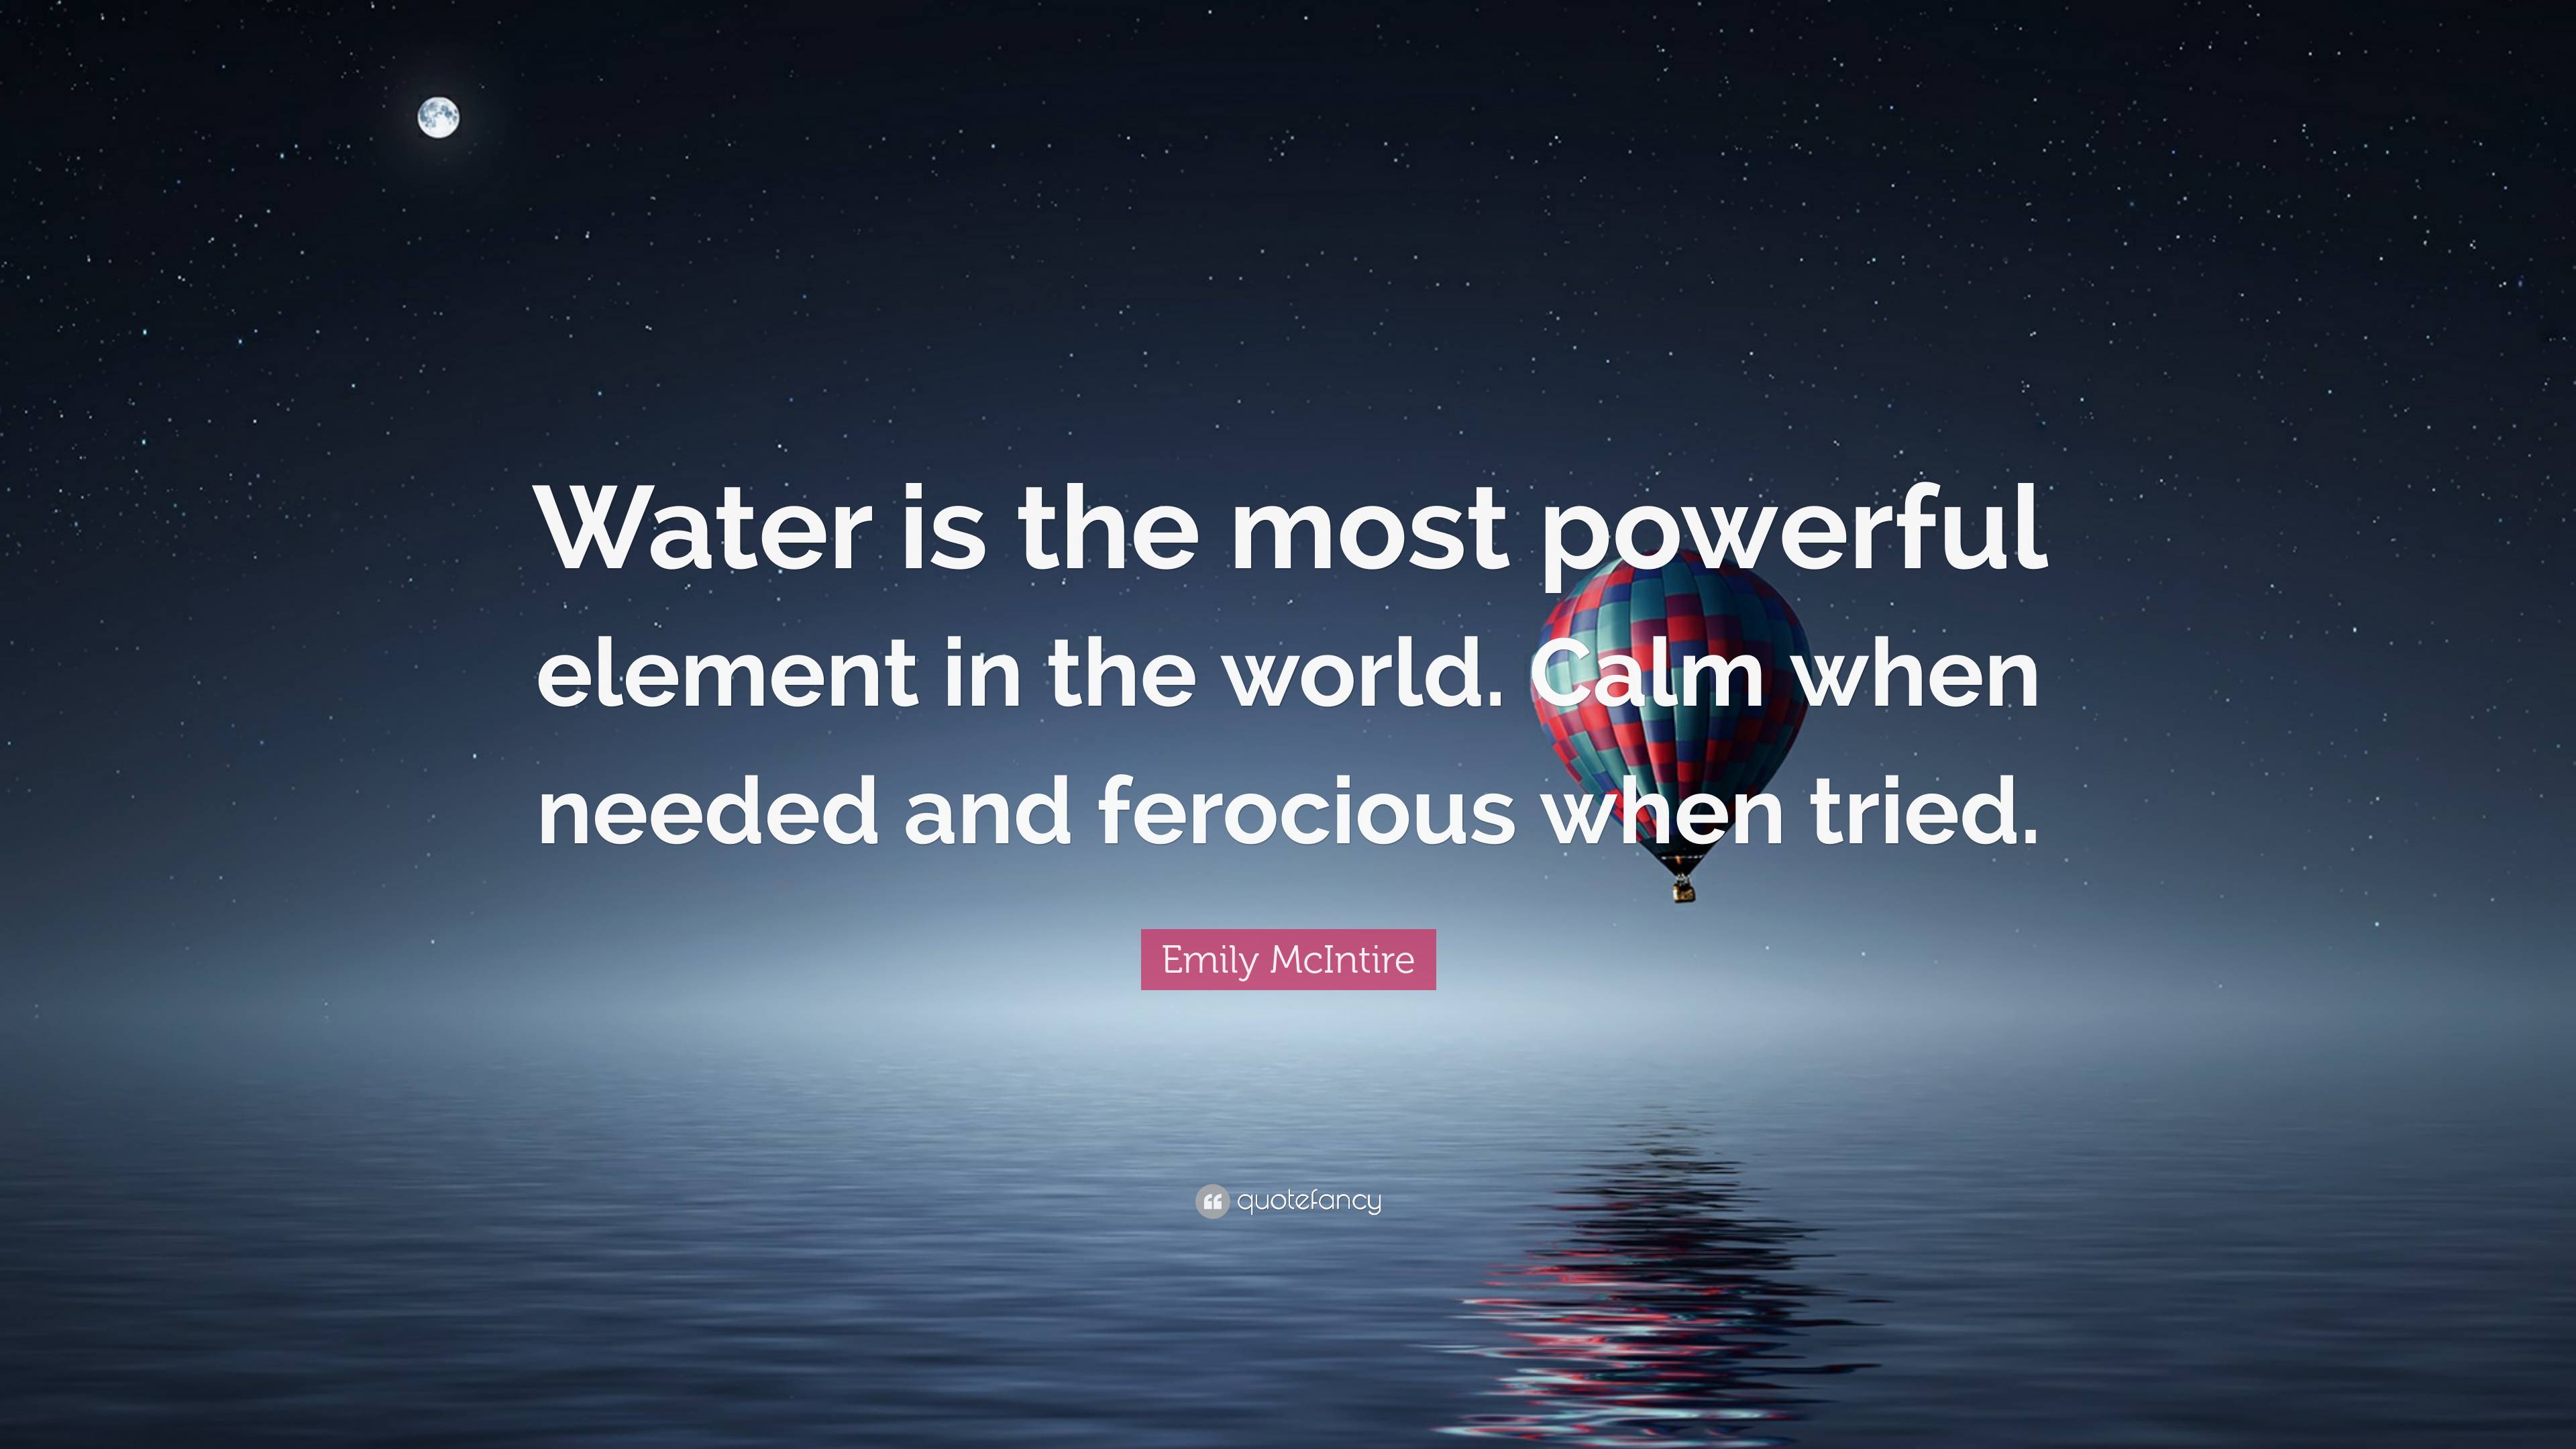 Emily McIntire Quote: “Water is the most powerful element in the world ...